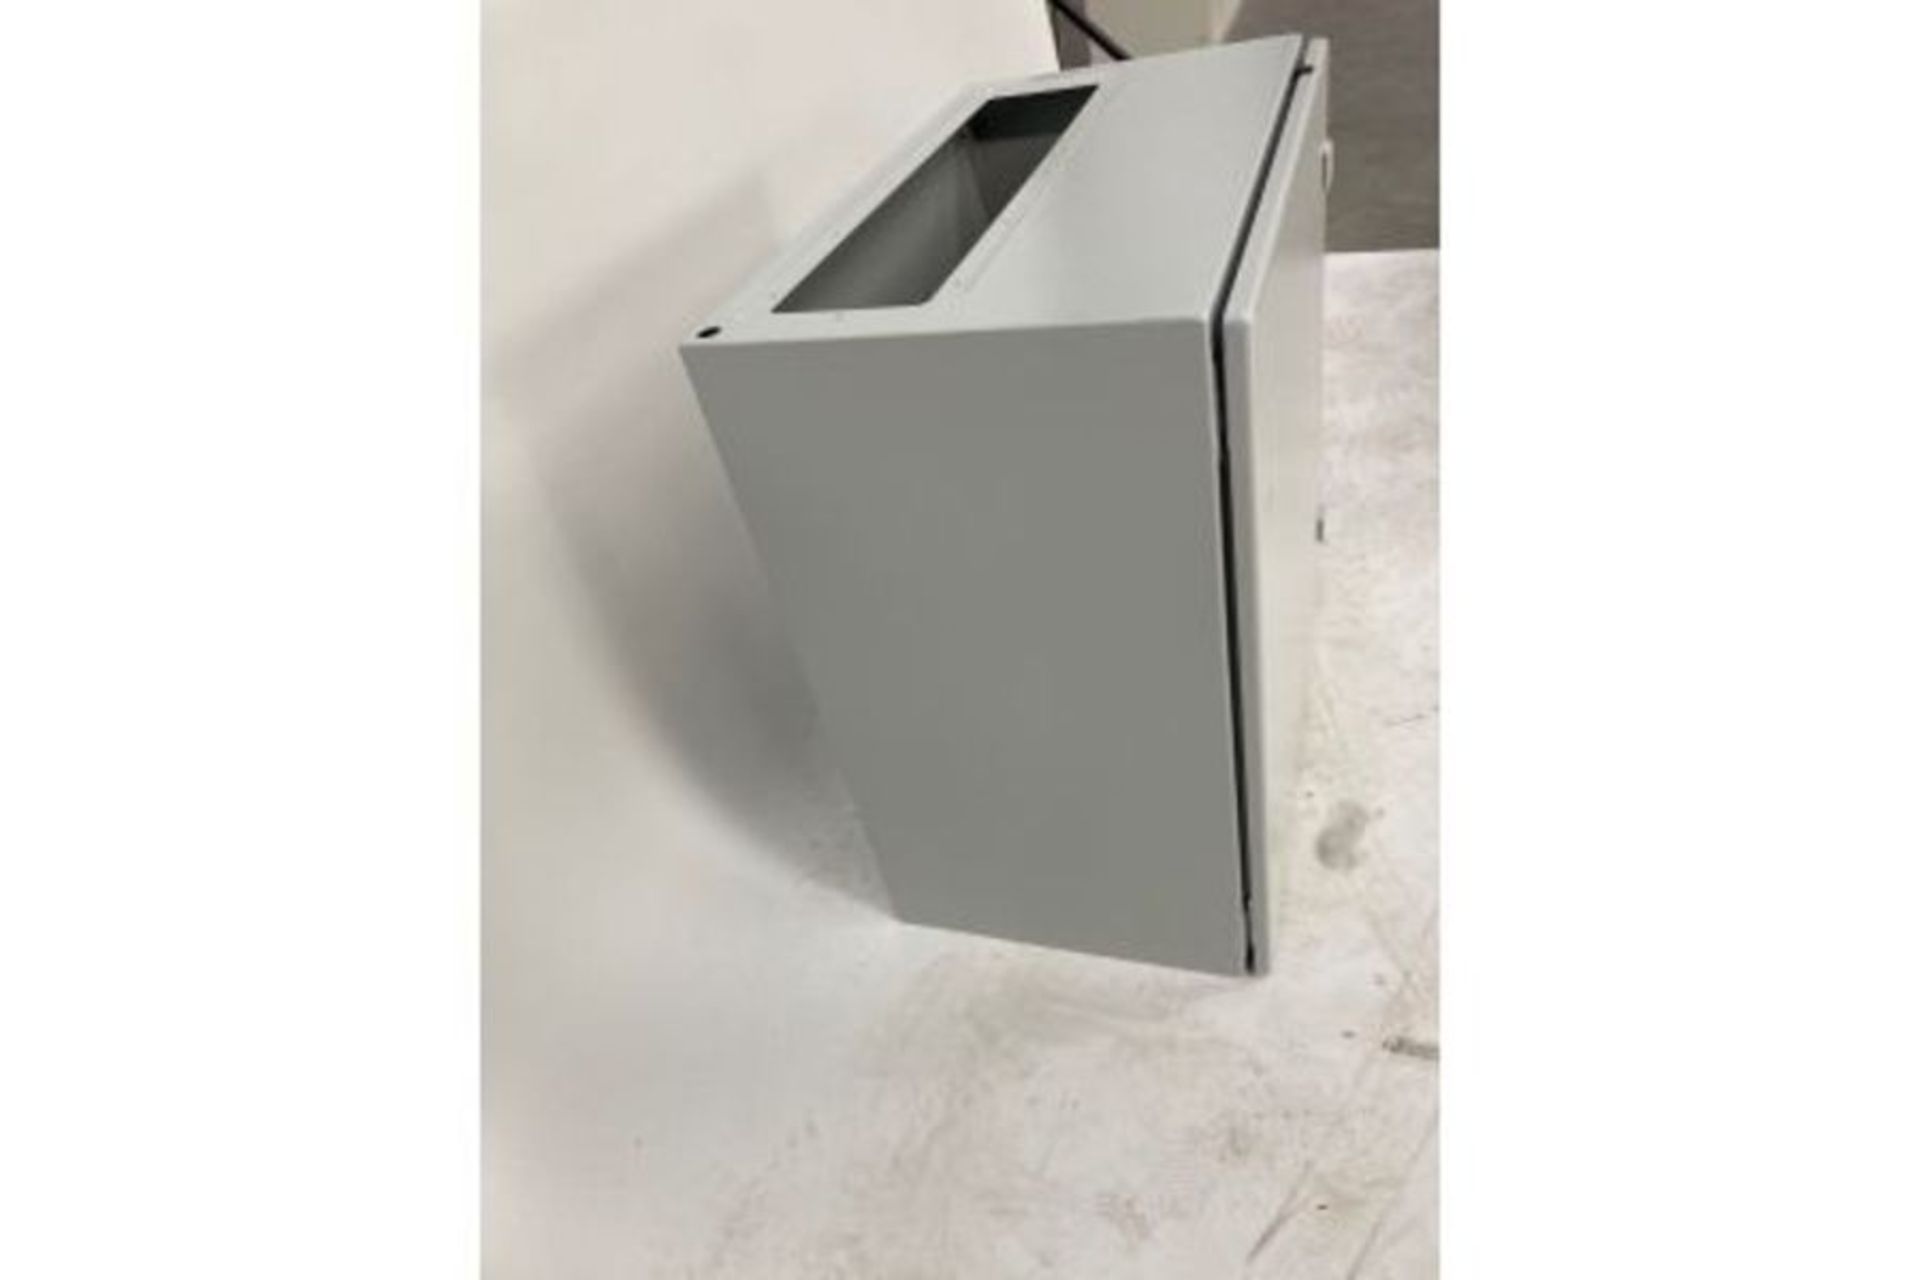 Rittal - compact cabinet. - Image 4 of 4